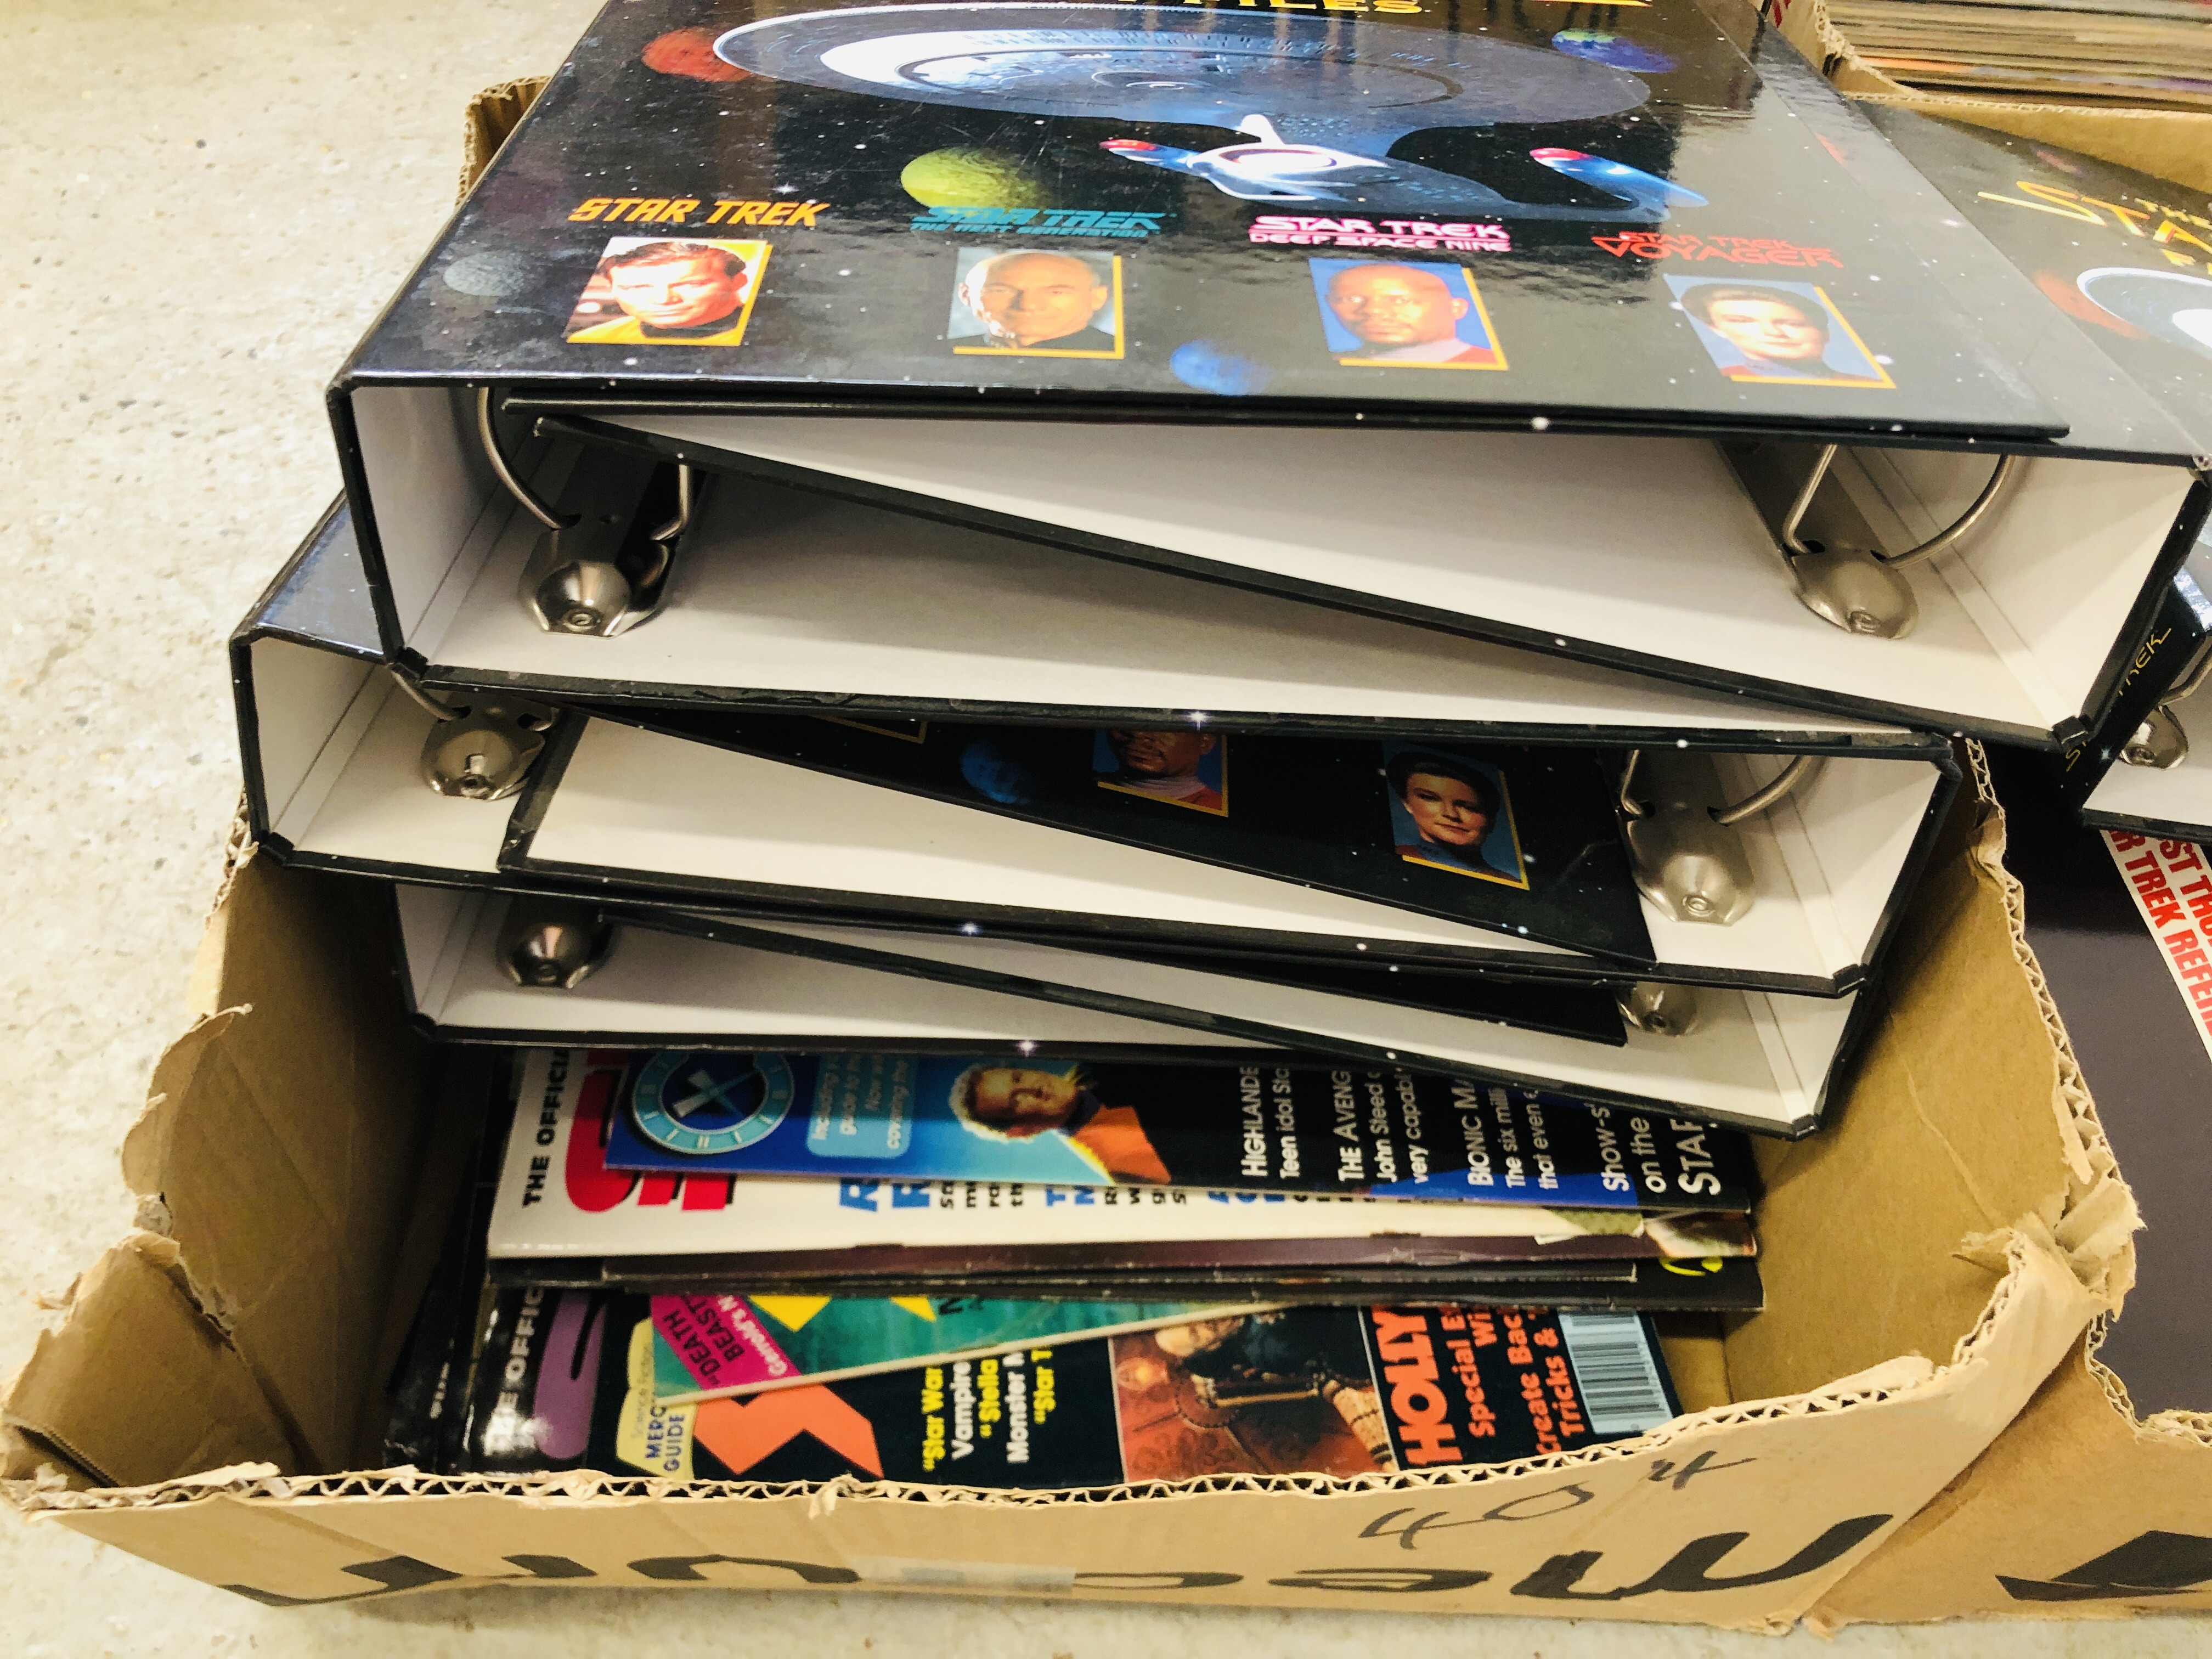 A LARGE COLLECTION OF STAR TREK FACT FILES ALONG WITH OTHER STAR TREK MAGAZINES, THE FINAL FRONTIER, - Image 2 of 7